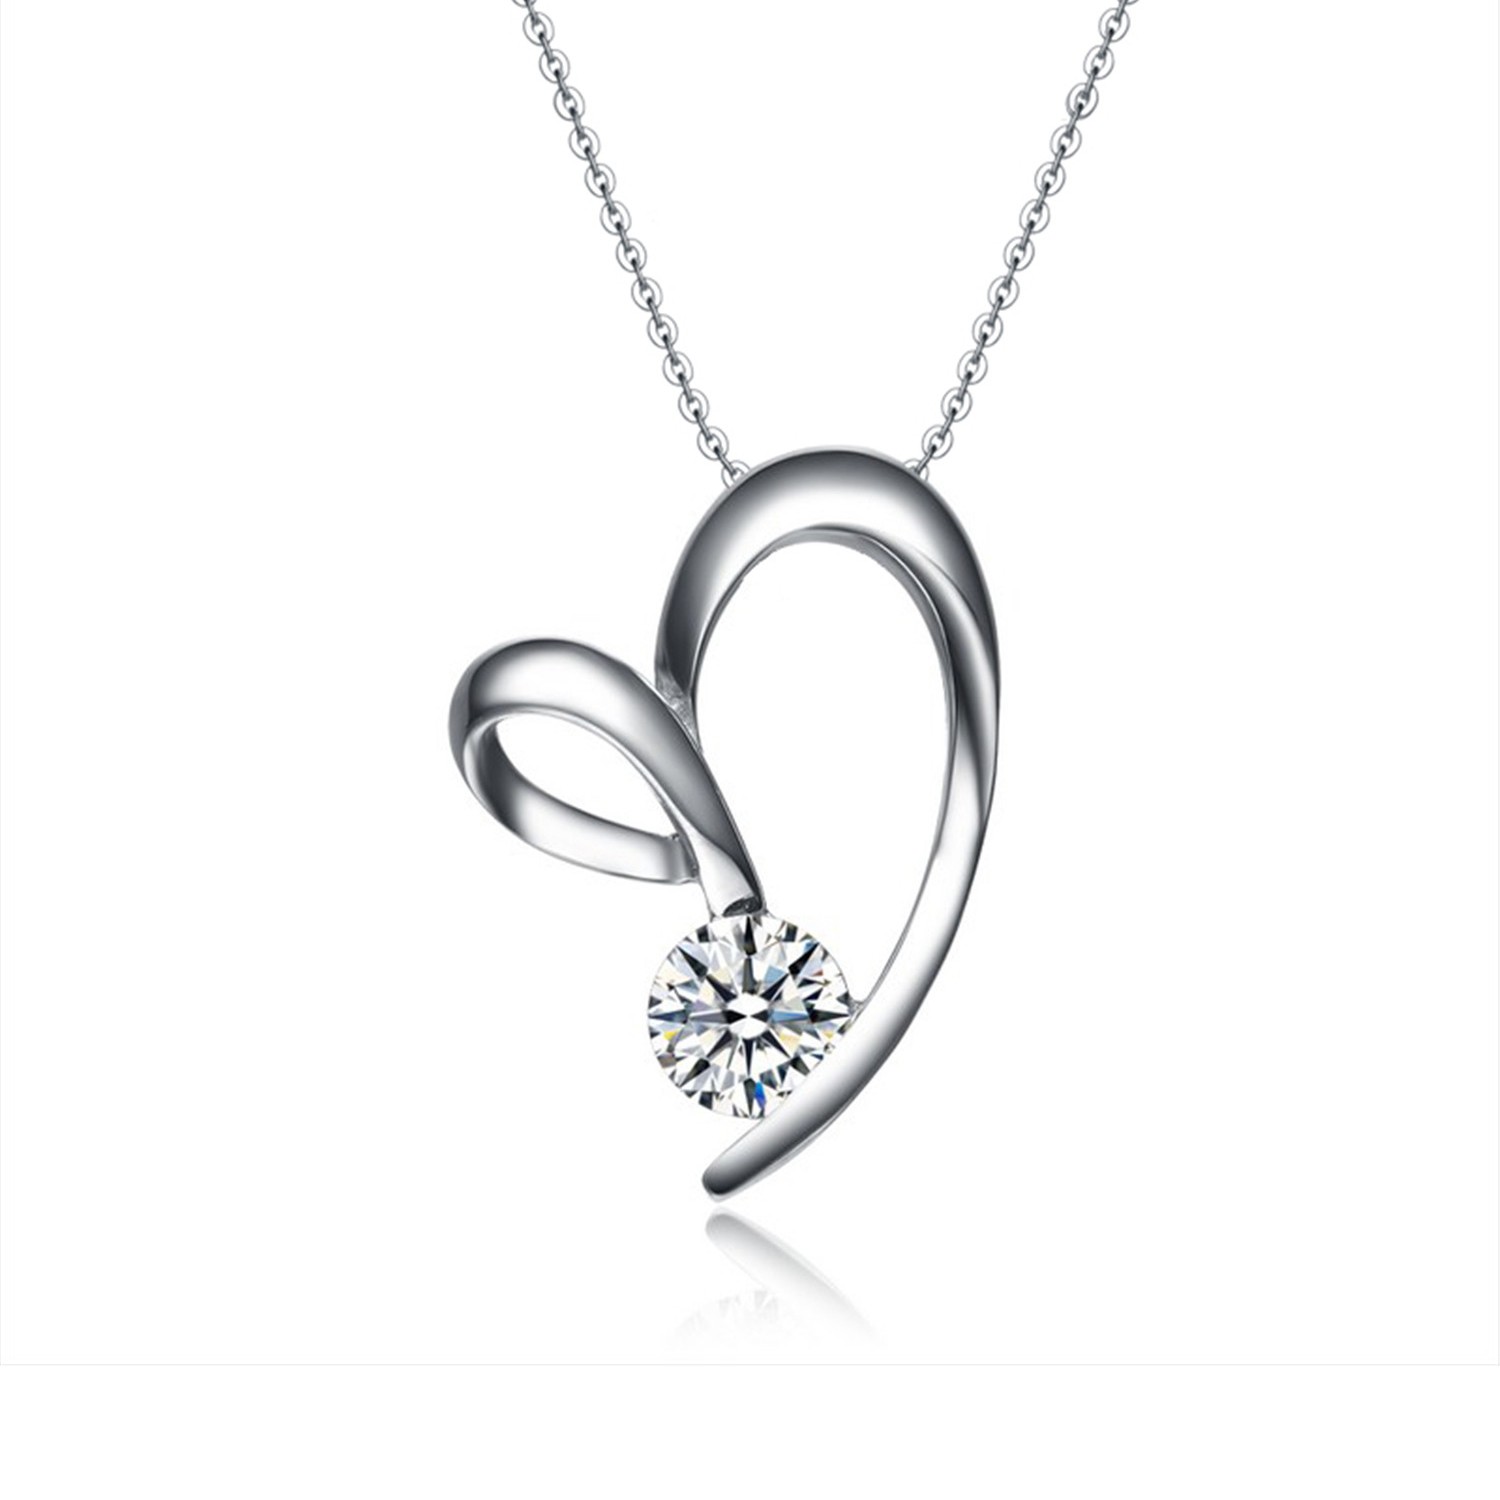 Engagement Gift Jewelry Manufacturer 925 sterling silver cubic zirconia heart pendant necklace